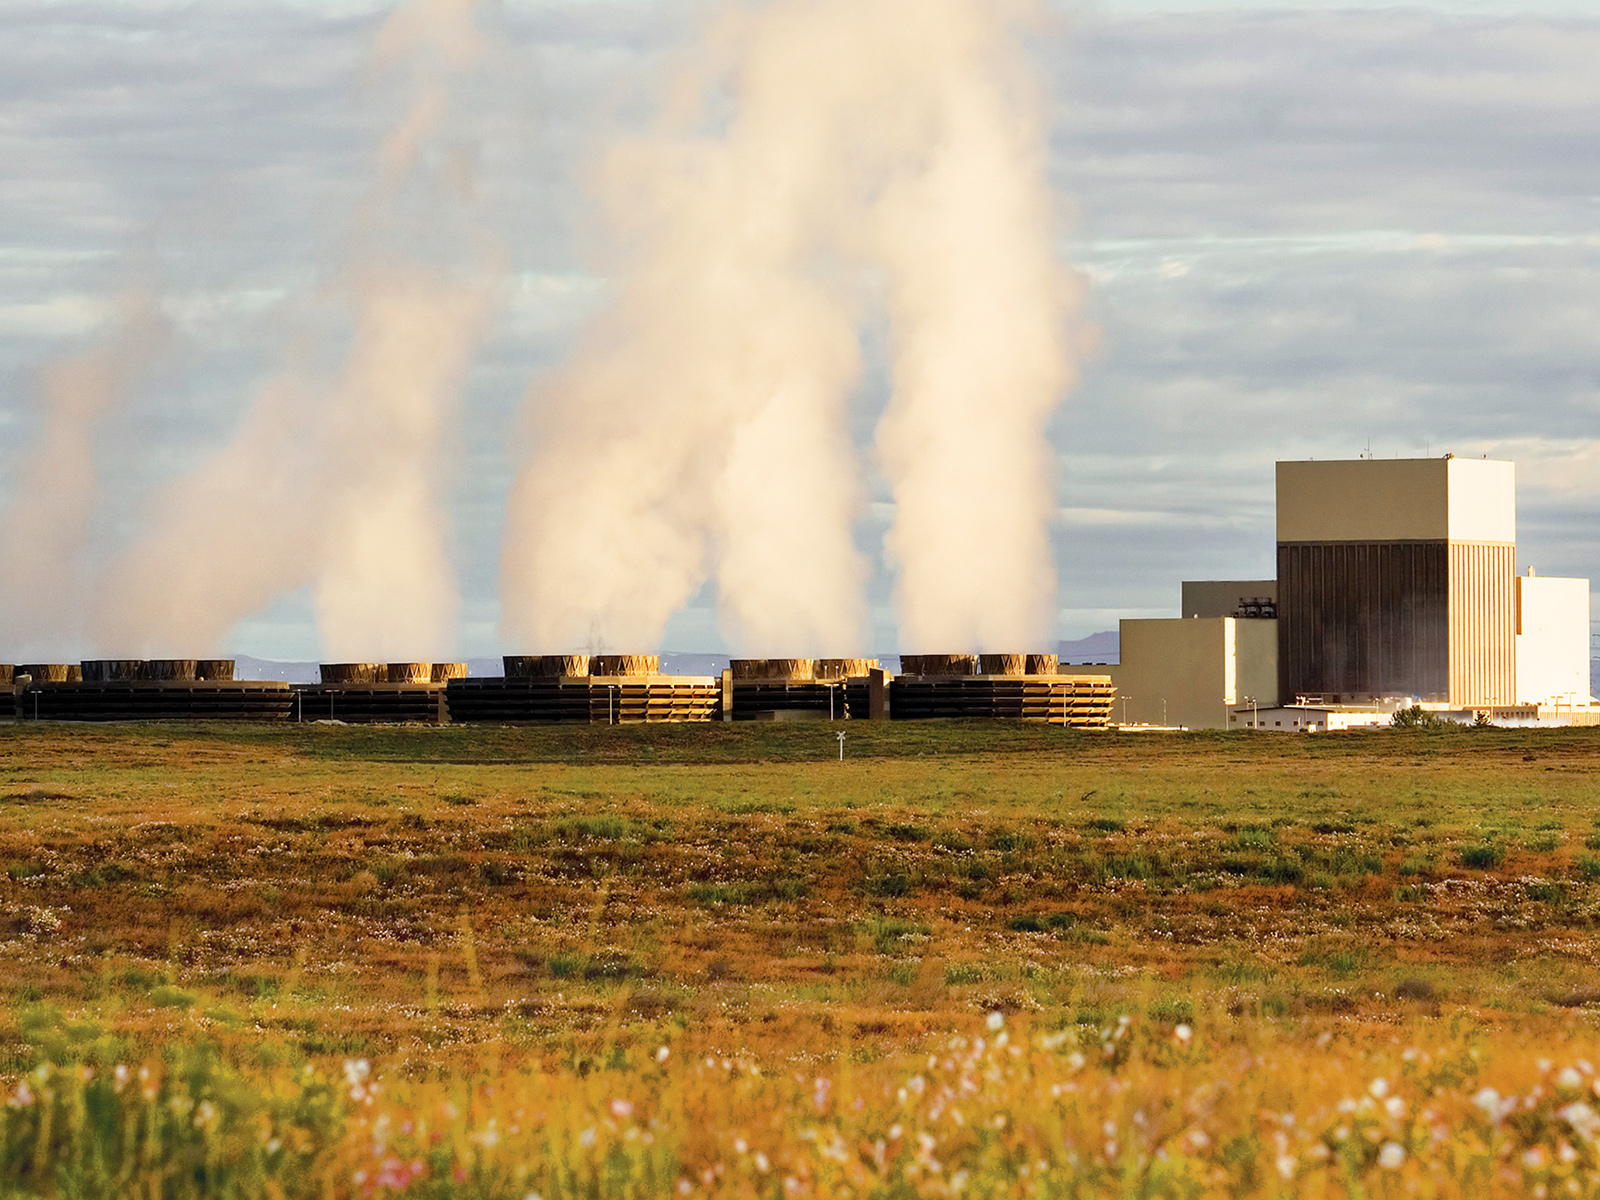 Washington state's only commercial nuclear power plant is located in the arid desert near Richland. The buildings let off clouds of steam as hot air is released.